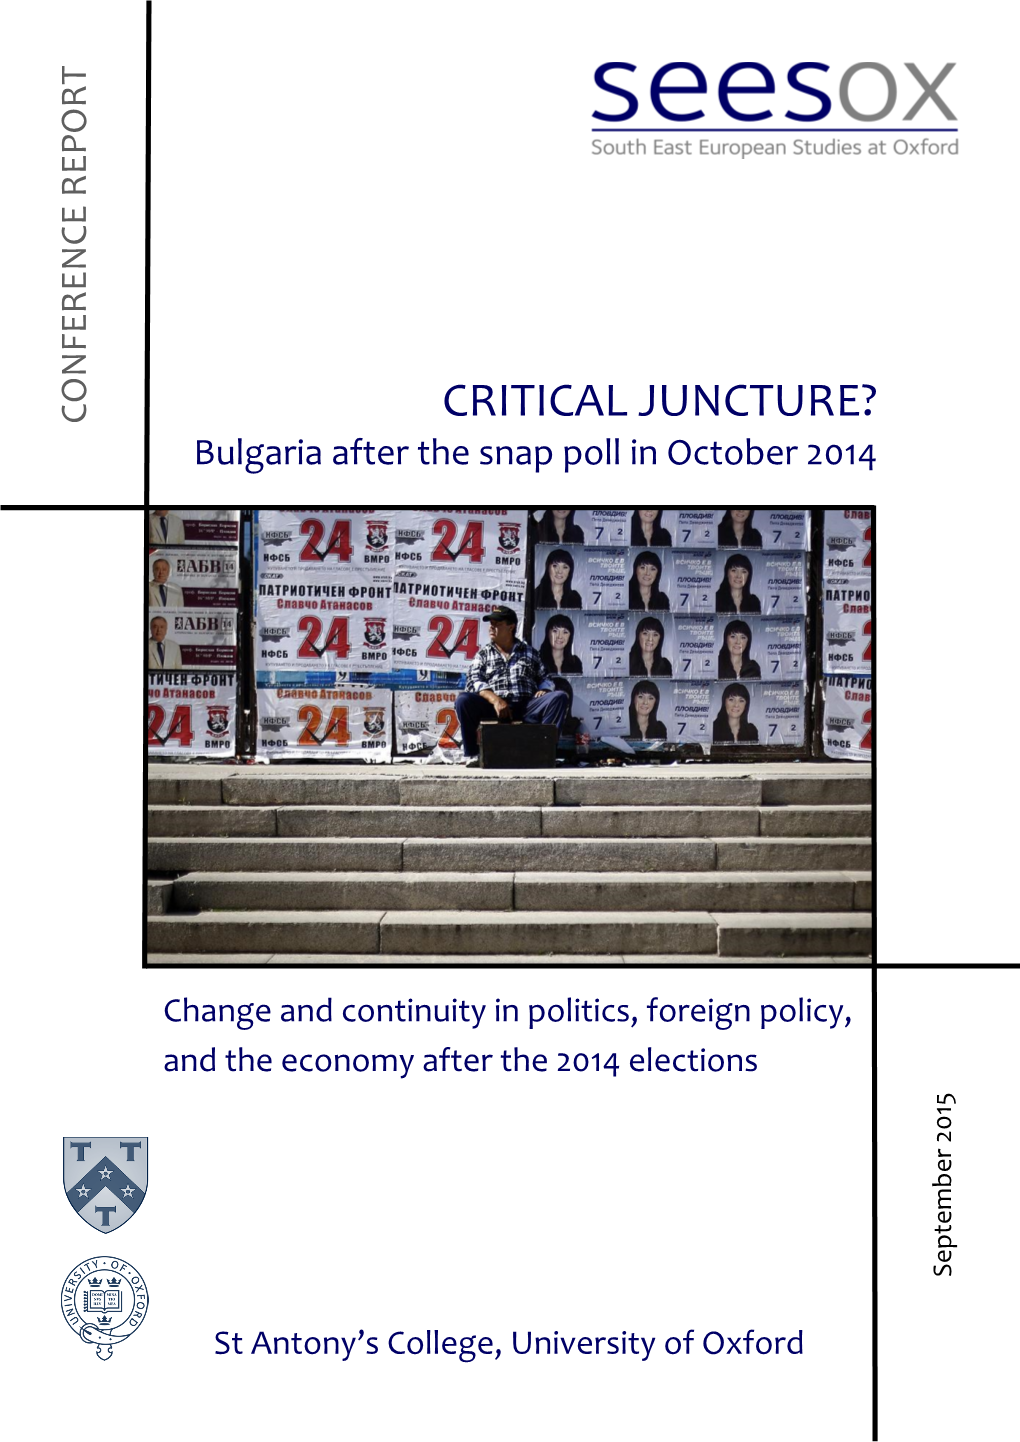 Critical Juncture? Bulgaria After the Snap Poll in October 2014